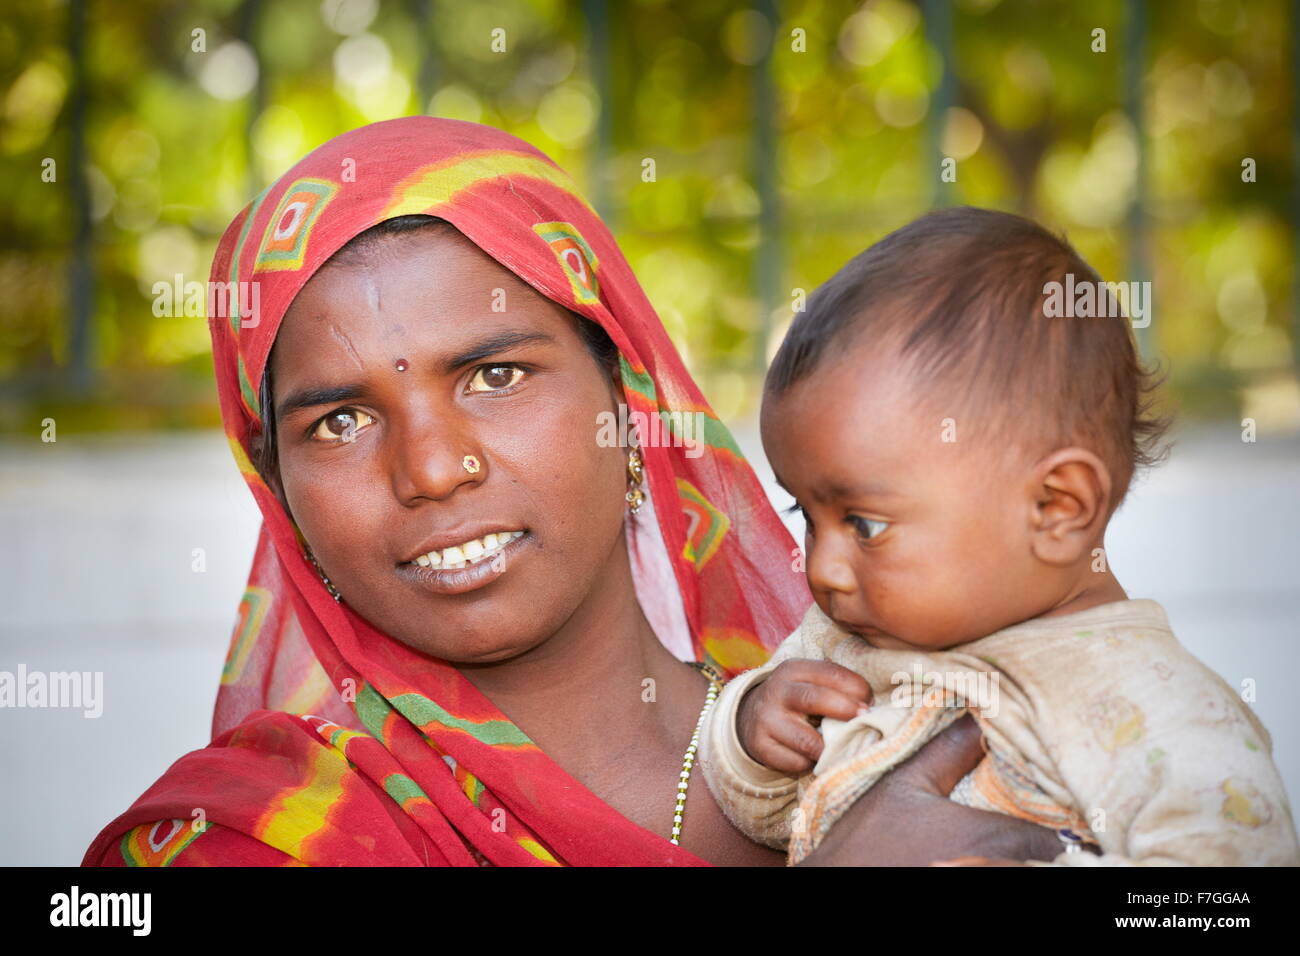 Portrait of a young india woman with her child, Udaipur, Rajasthan, India Stock Photo